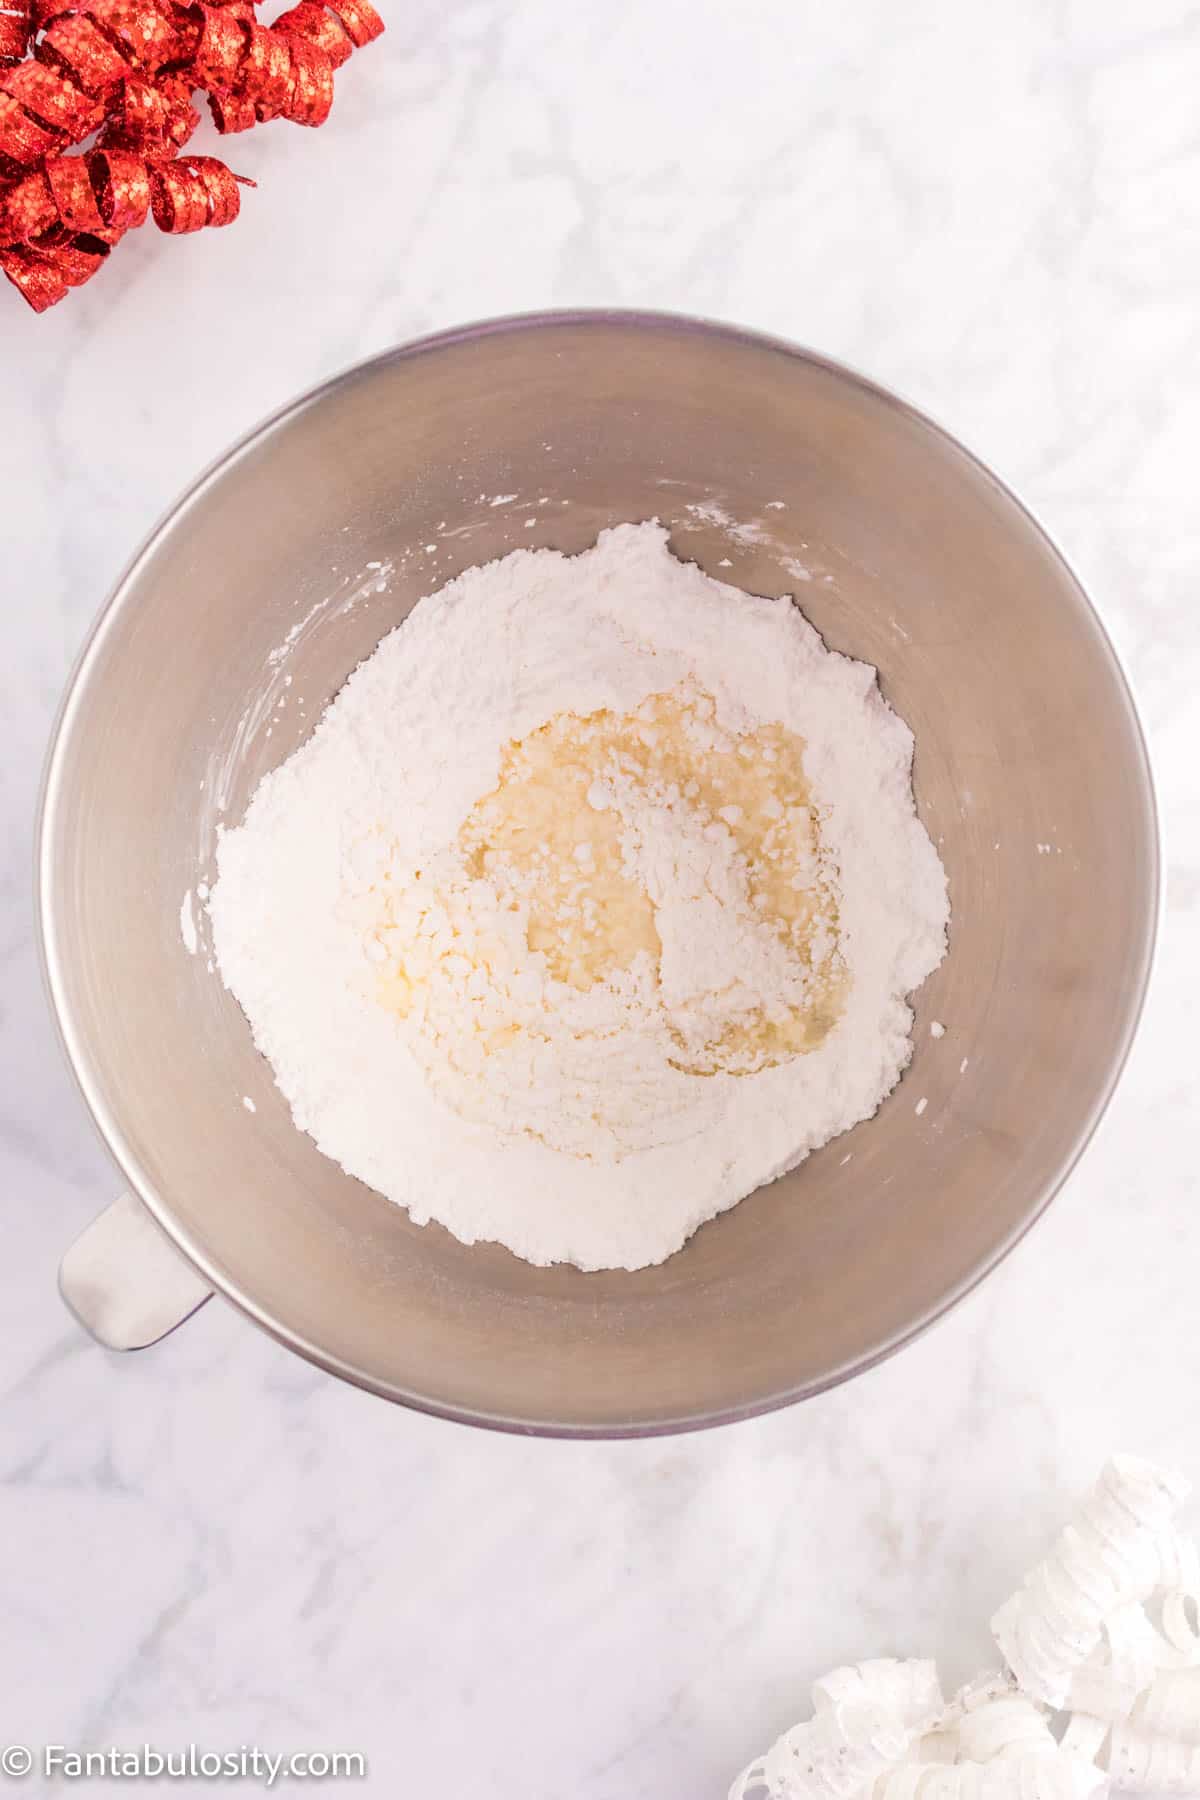 Creamed butter and powdered sugar in a mixing bowl.